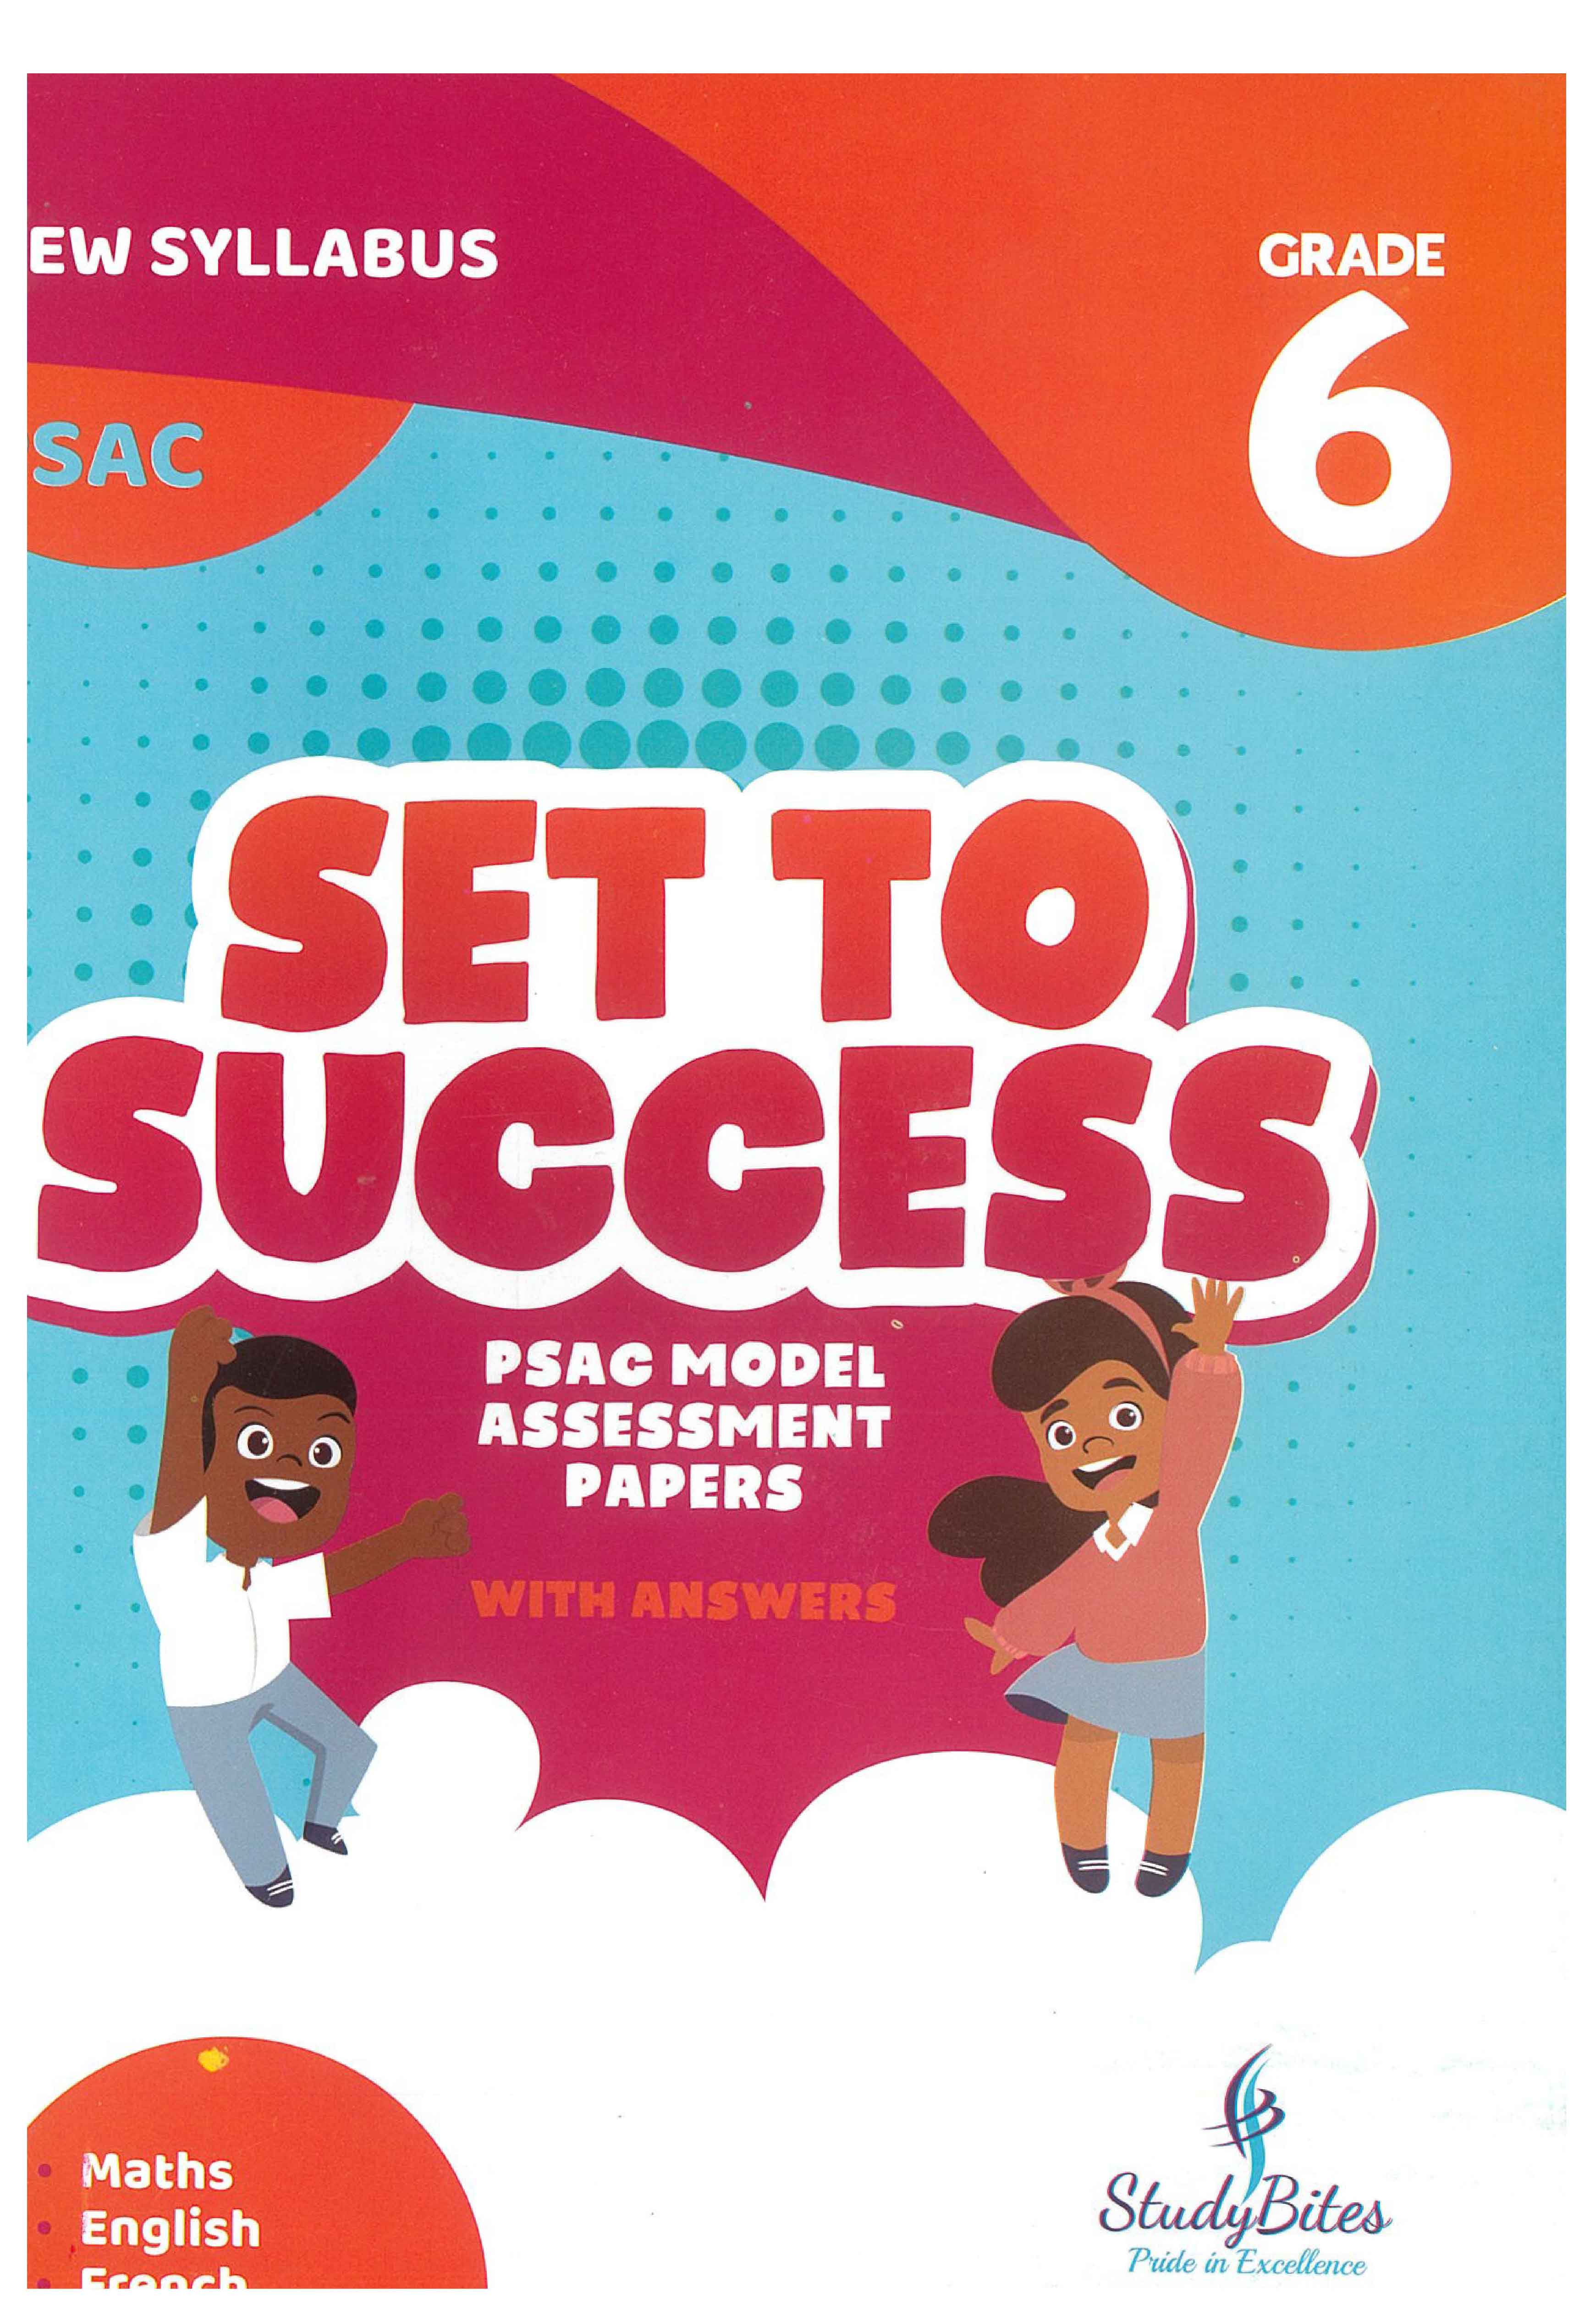 SET TO SUCCESS  PSAC MODEL ASSESSMENT PAPERS  GRADE 6 -ENGLISH FRENCH & MATHS